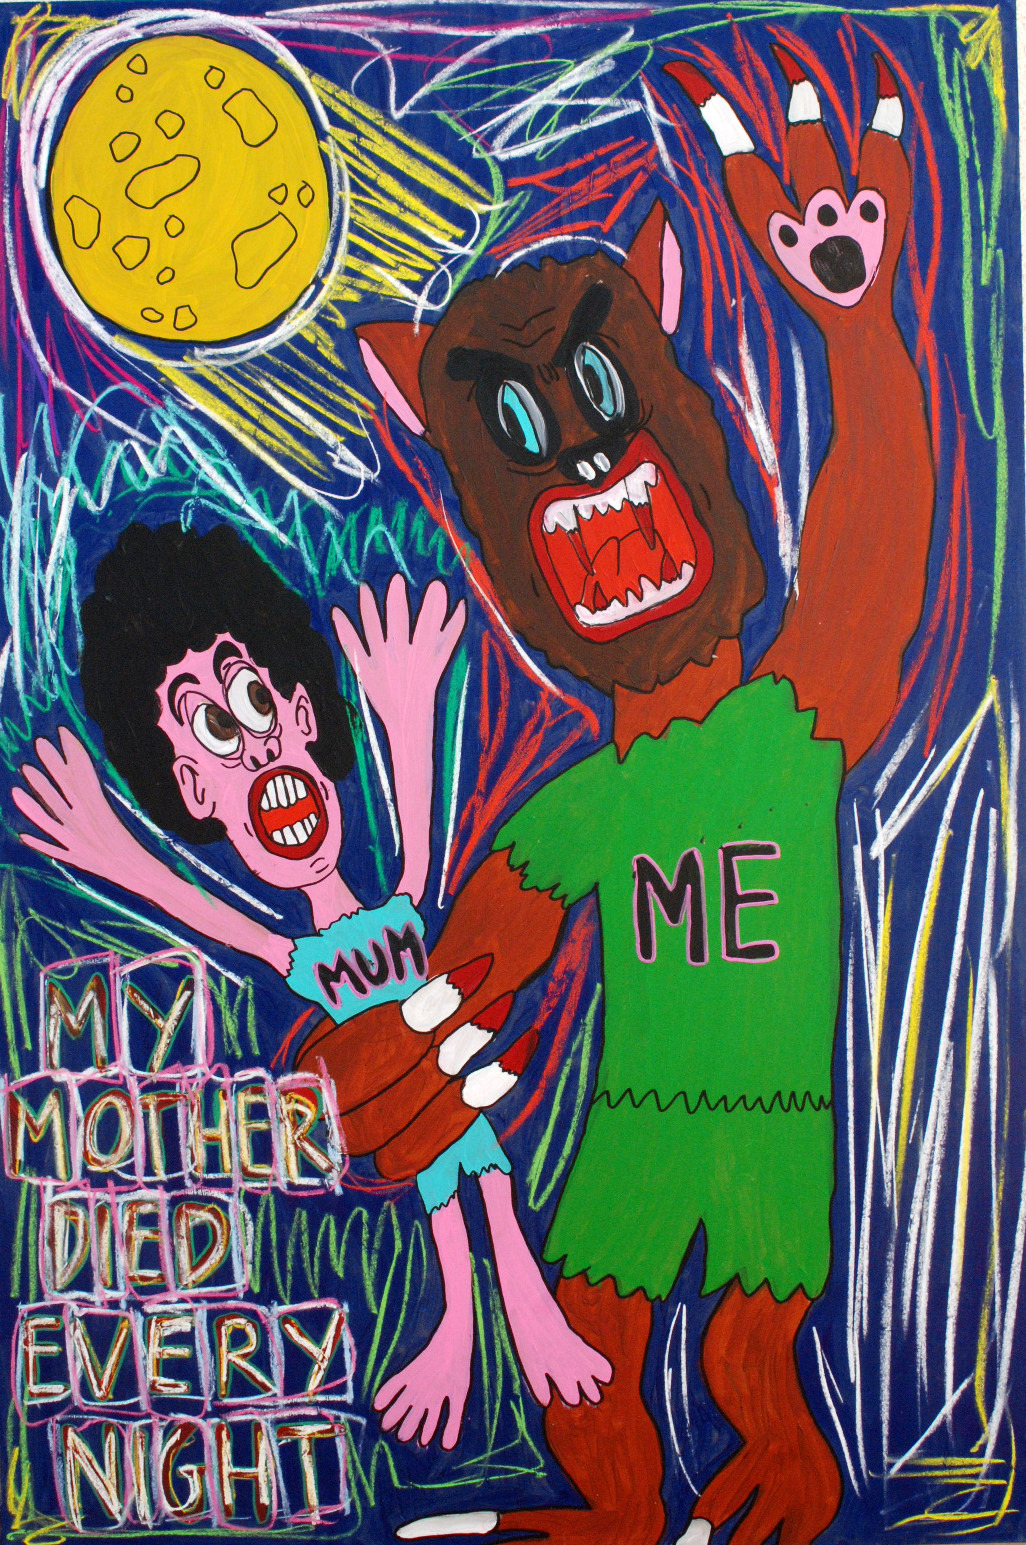    “My mum died every night” , 2012   Acrylic paint and pastel on wood, 90 x 130 cm 